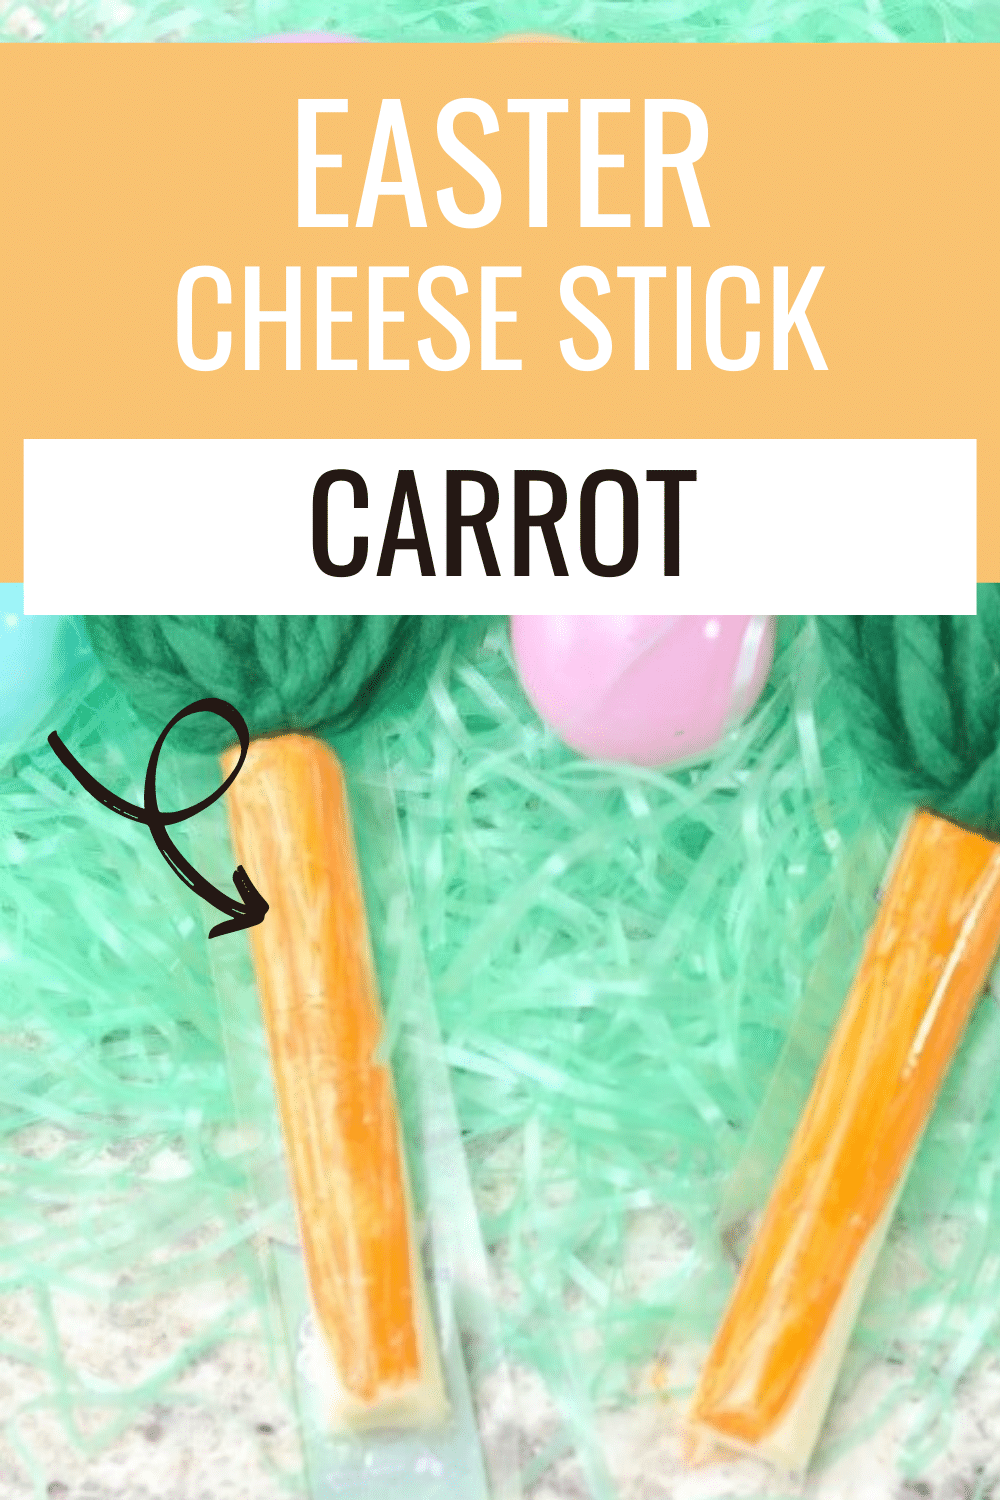 Snack time doesn't have to be boring! This cheese stick carrot is the perfect way to make snack time fun during the Easter season. #easter #funfoodforkids #snacks #easycrafts via @wondermomwannab